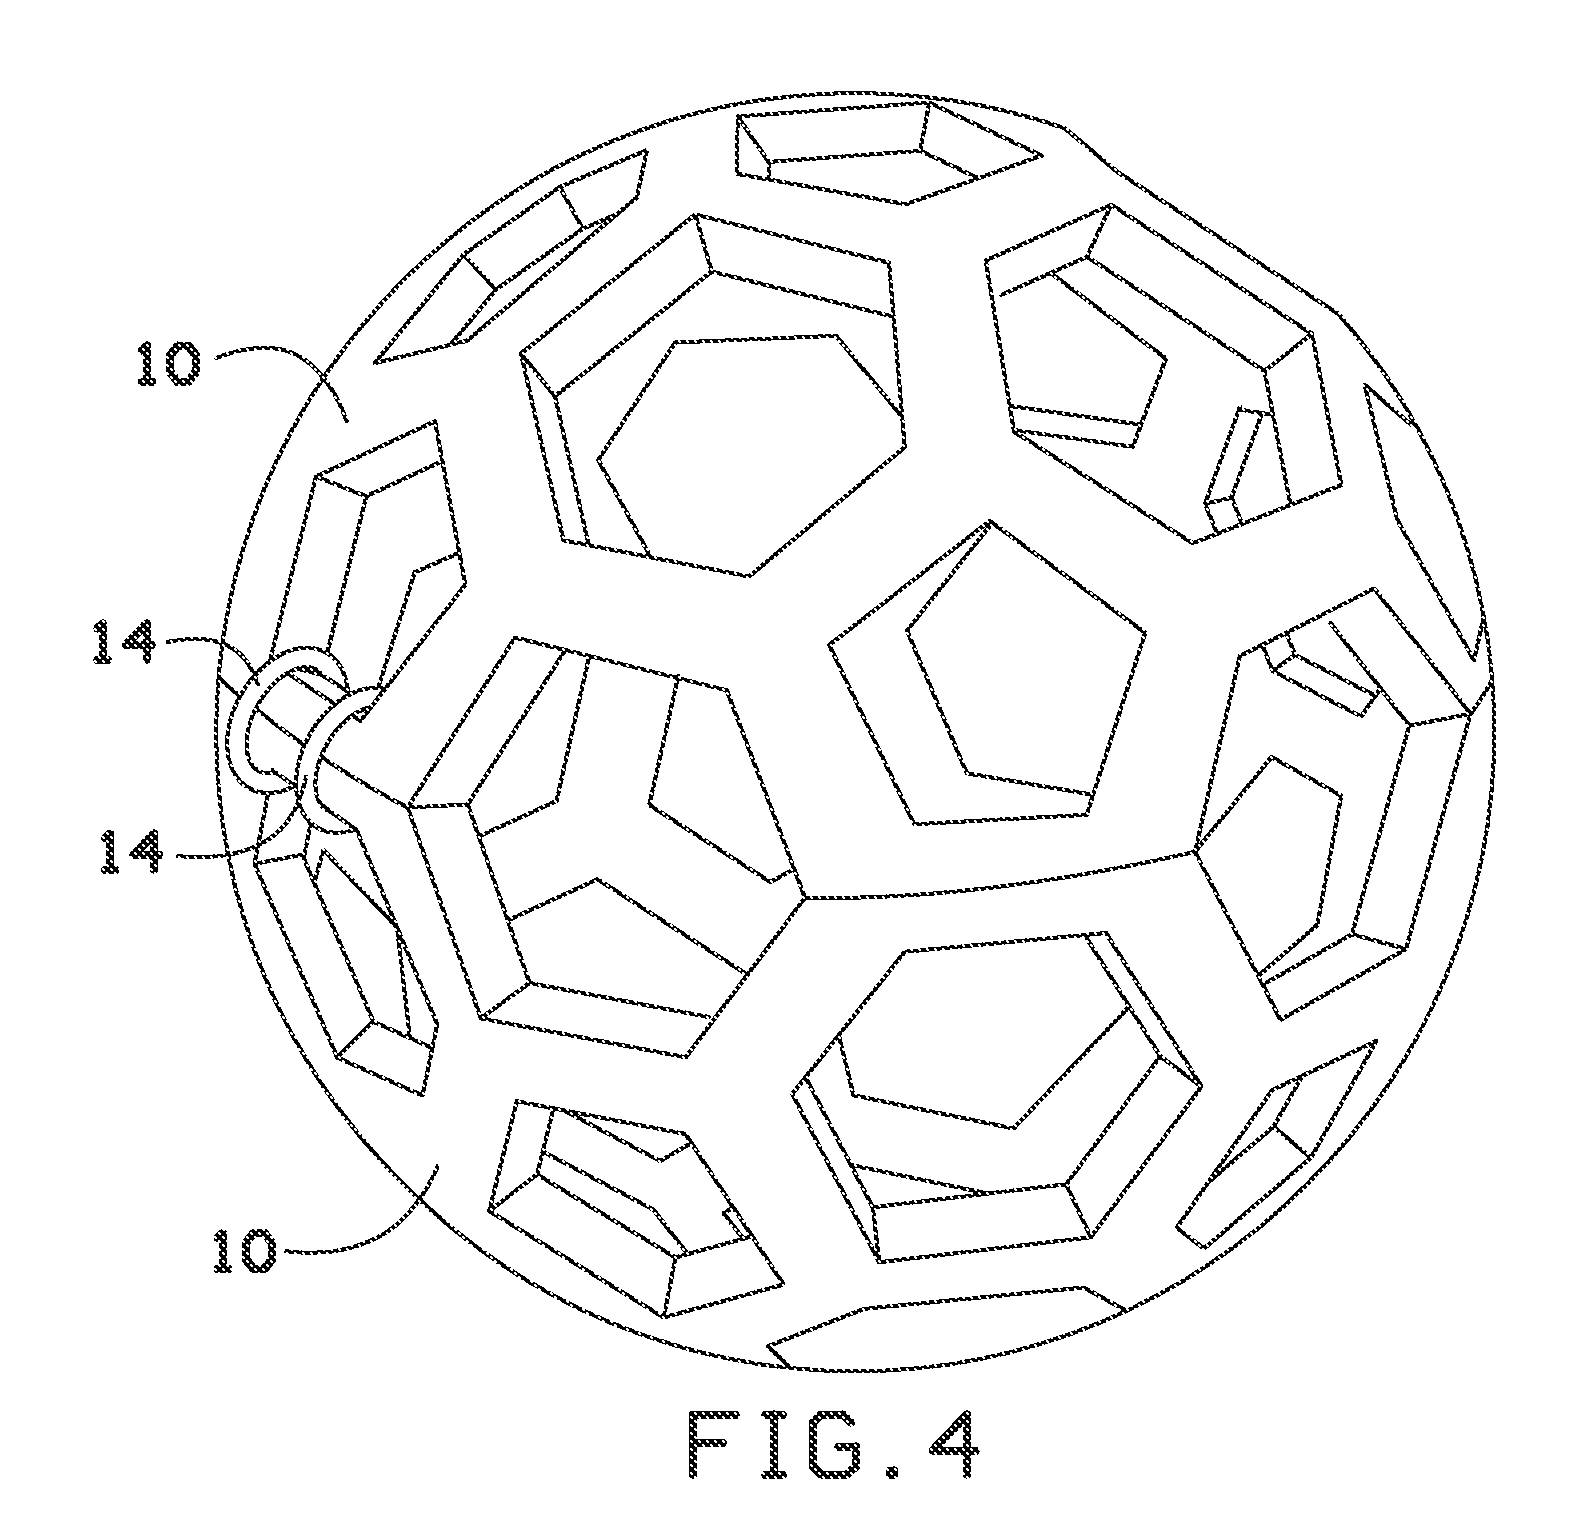 Flexible ball for transporting laundry